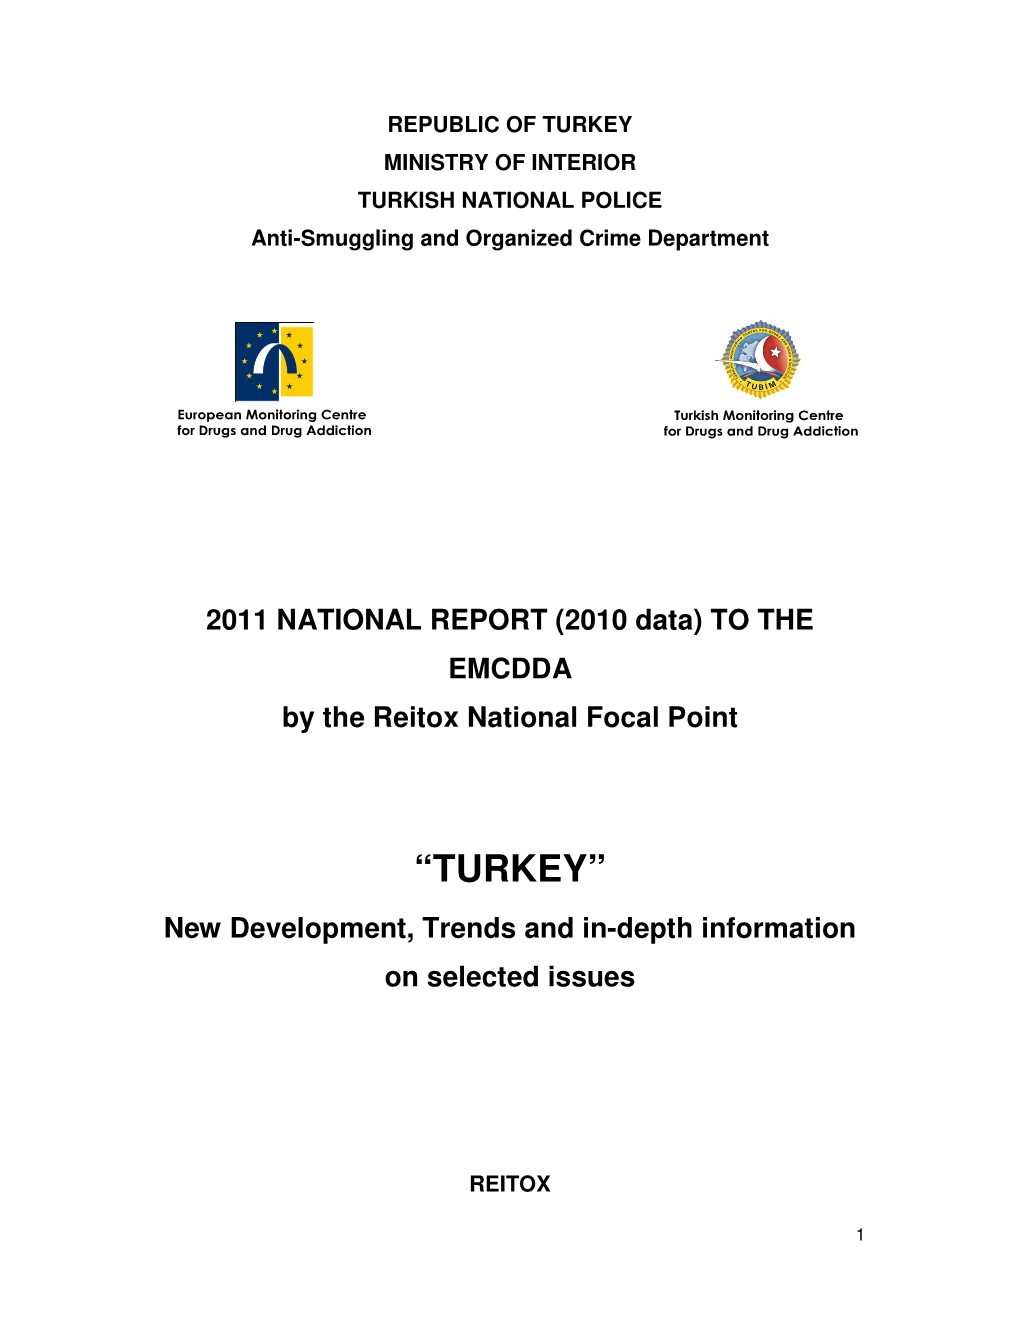 “TURKEY” New Development, Trends and In-Depth Information on Selected Issues